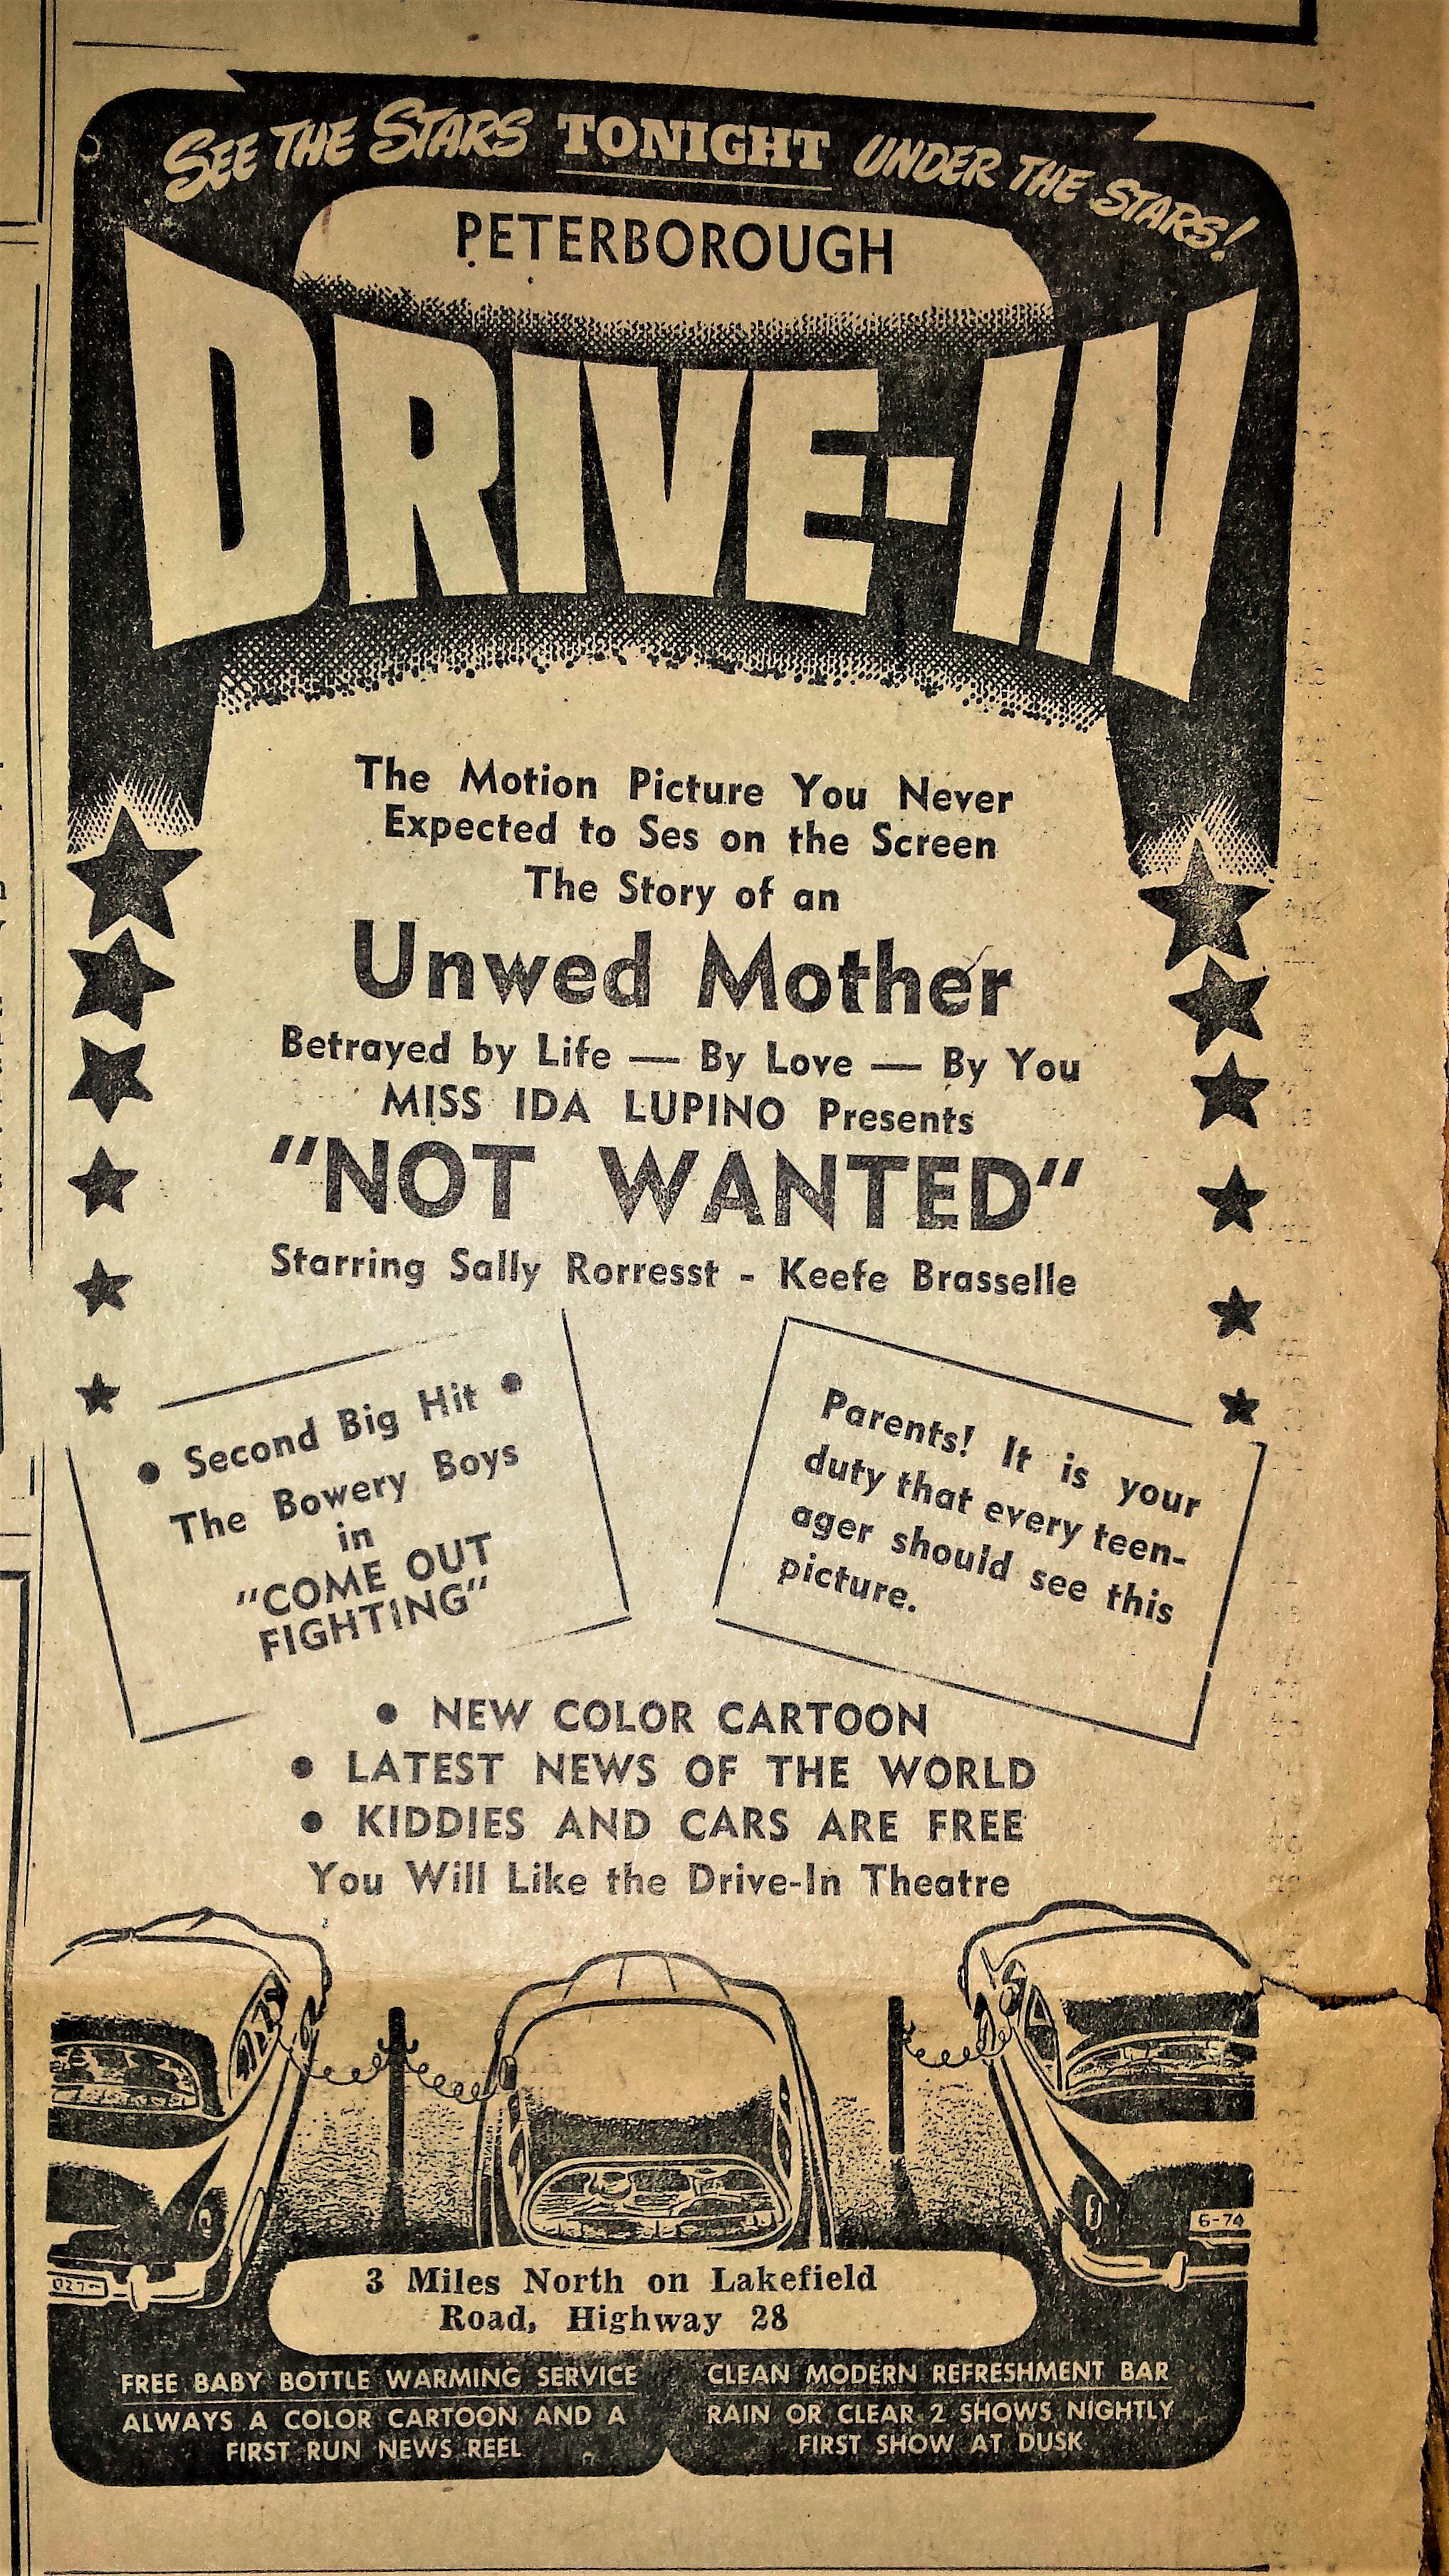 1951 May 21 p7 theatre ads drive in (2).jpg